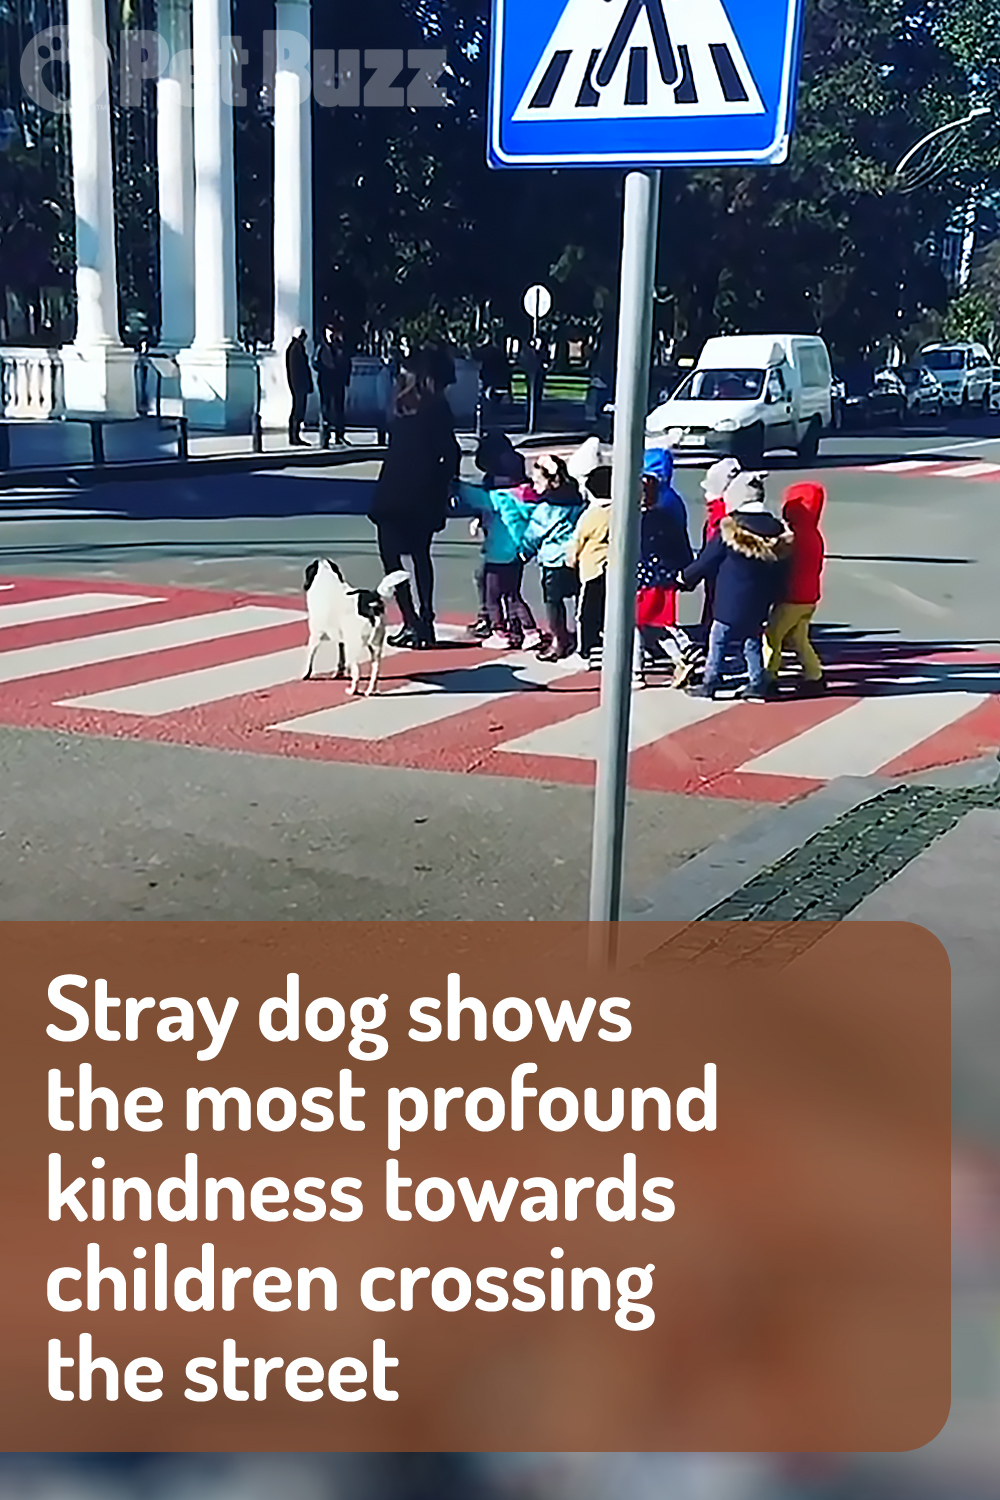 Stray dog shows the most profound kindness towards children crossing the street